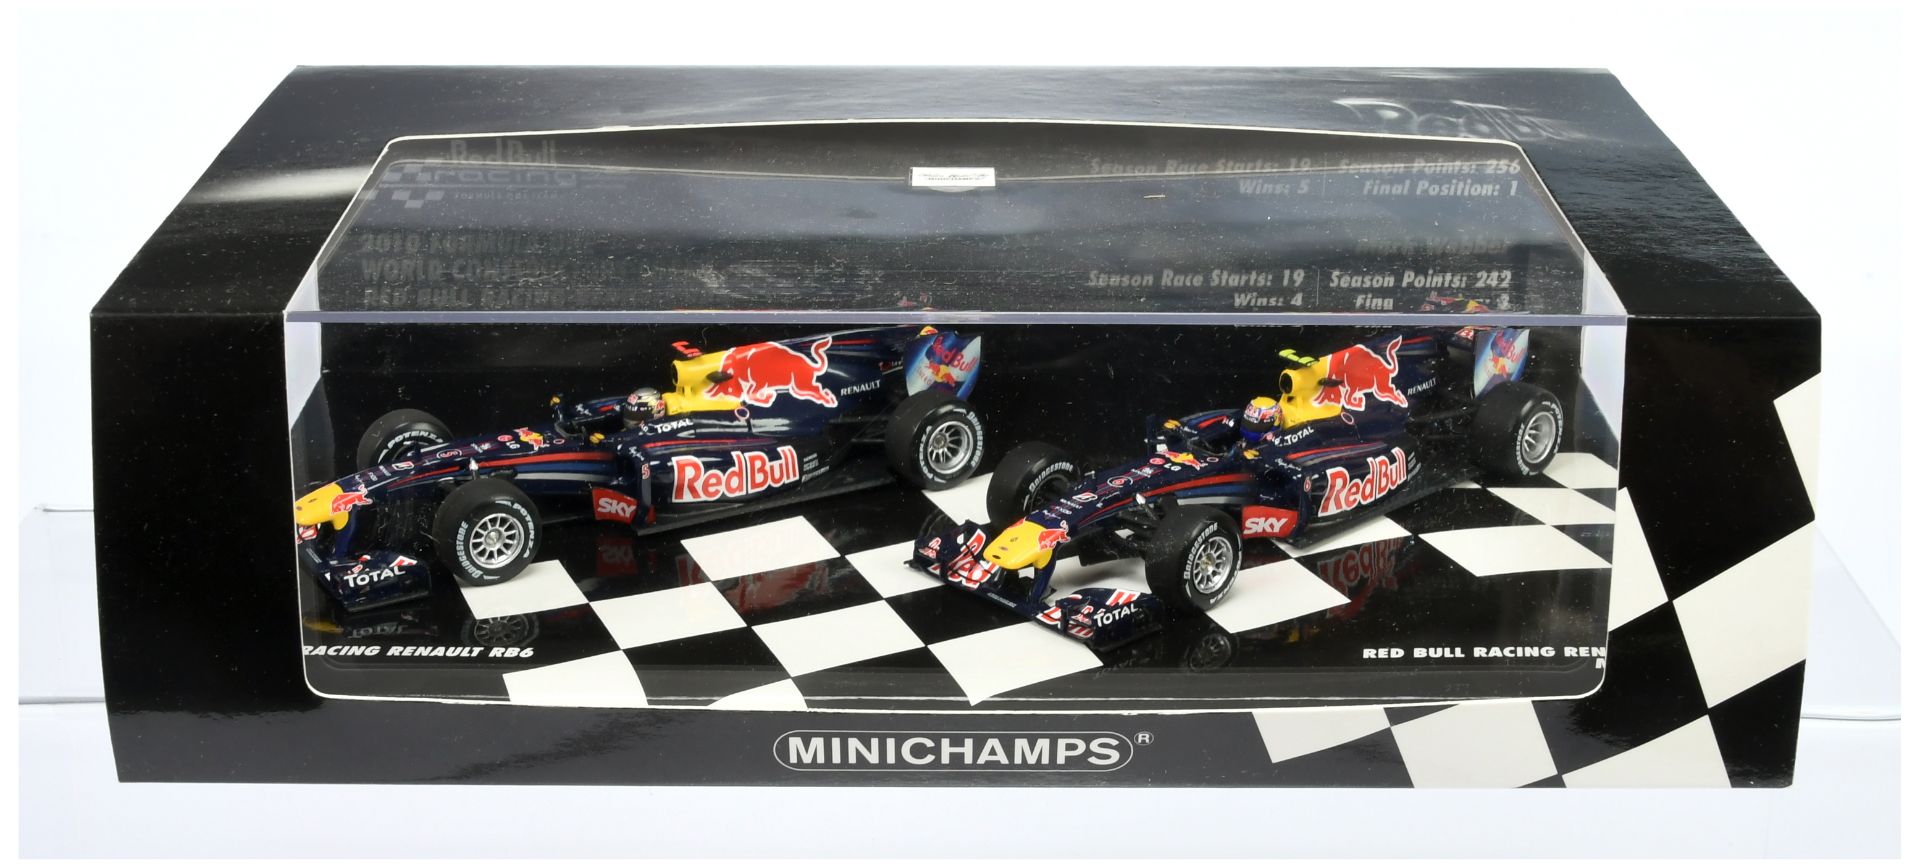 Minichamps (1/43rd) 412 100506  Renault RB6 "Red Bull" - "Champions" 2010 